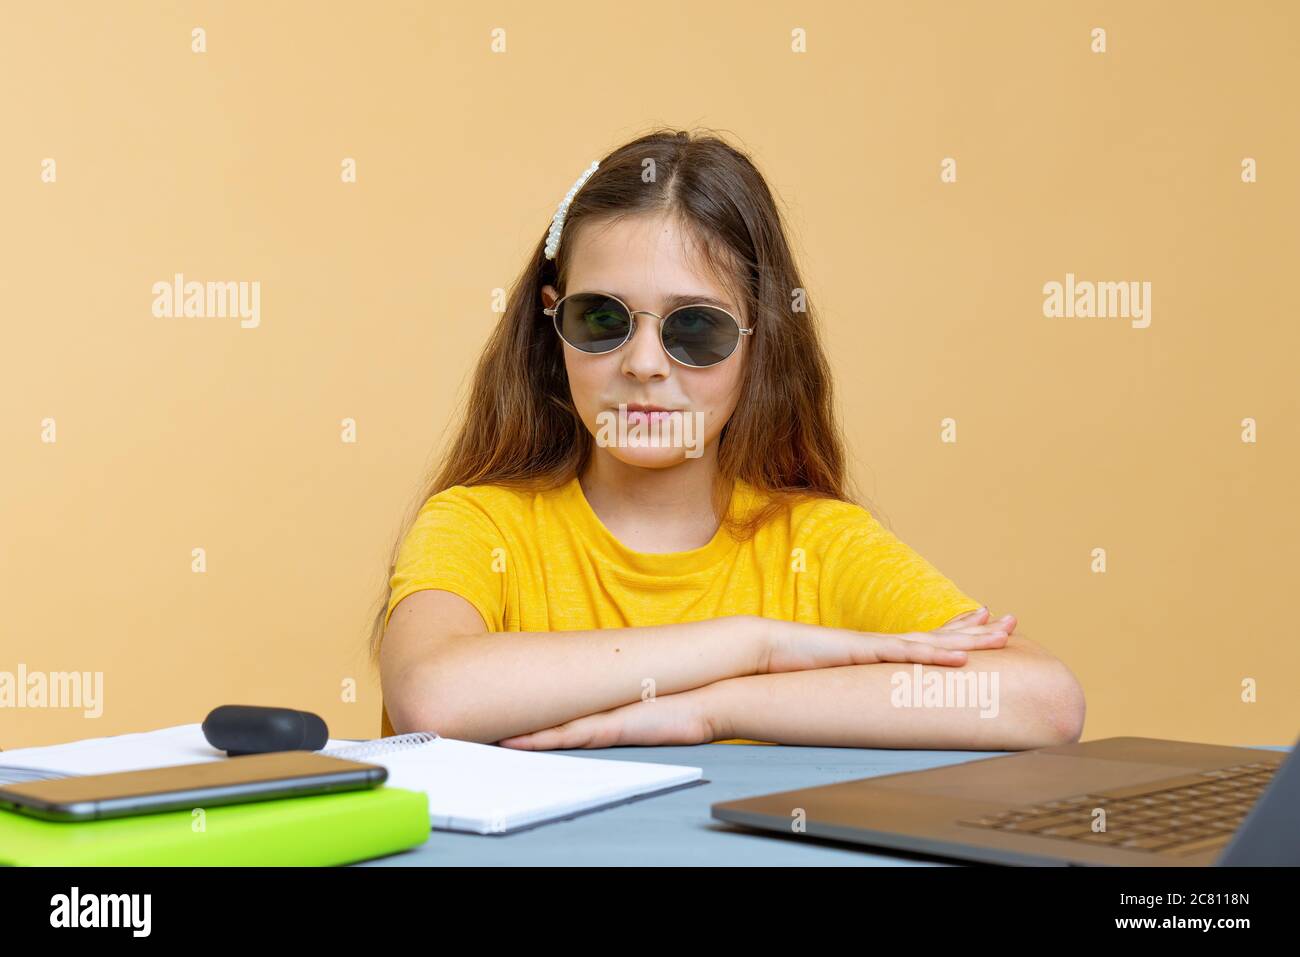 Focused young european girl businesswoman in sunglasses or student looking at the camera, serious black teen working or studying with computer doing Stock Photo